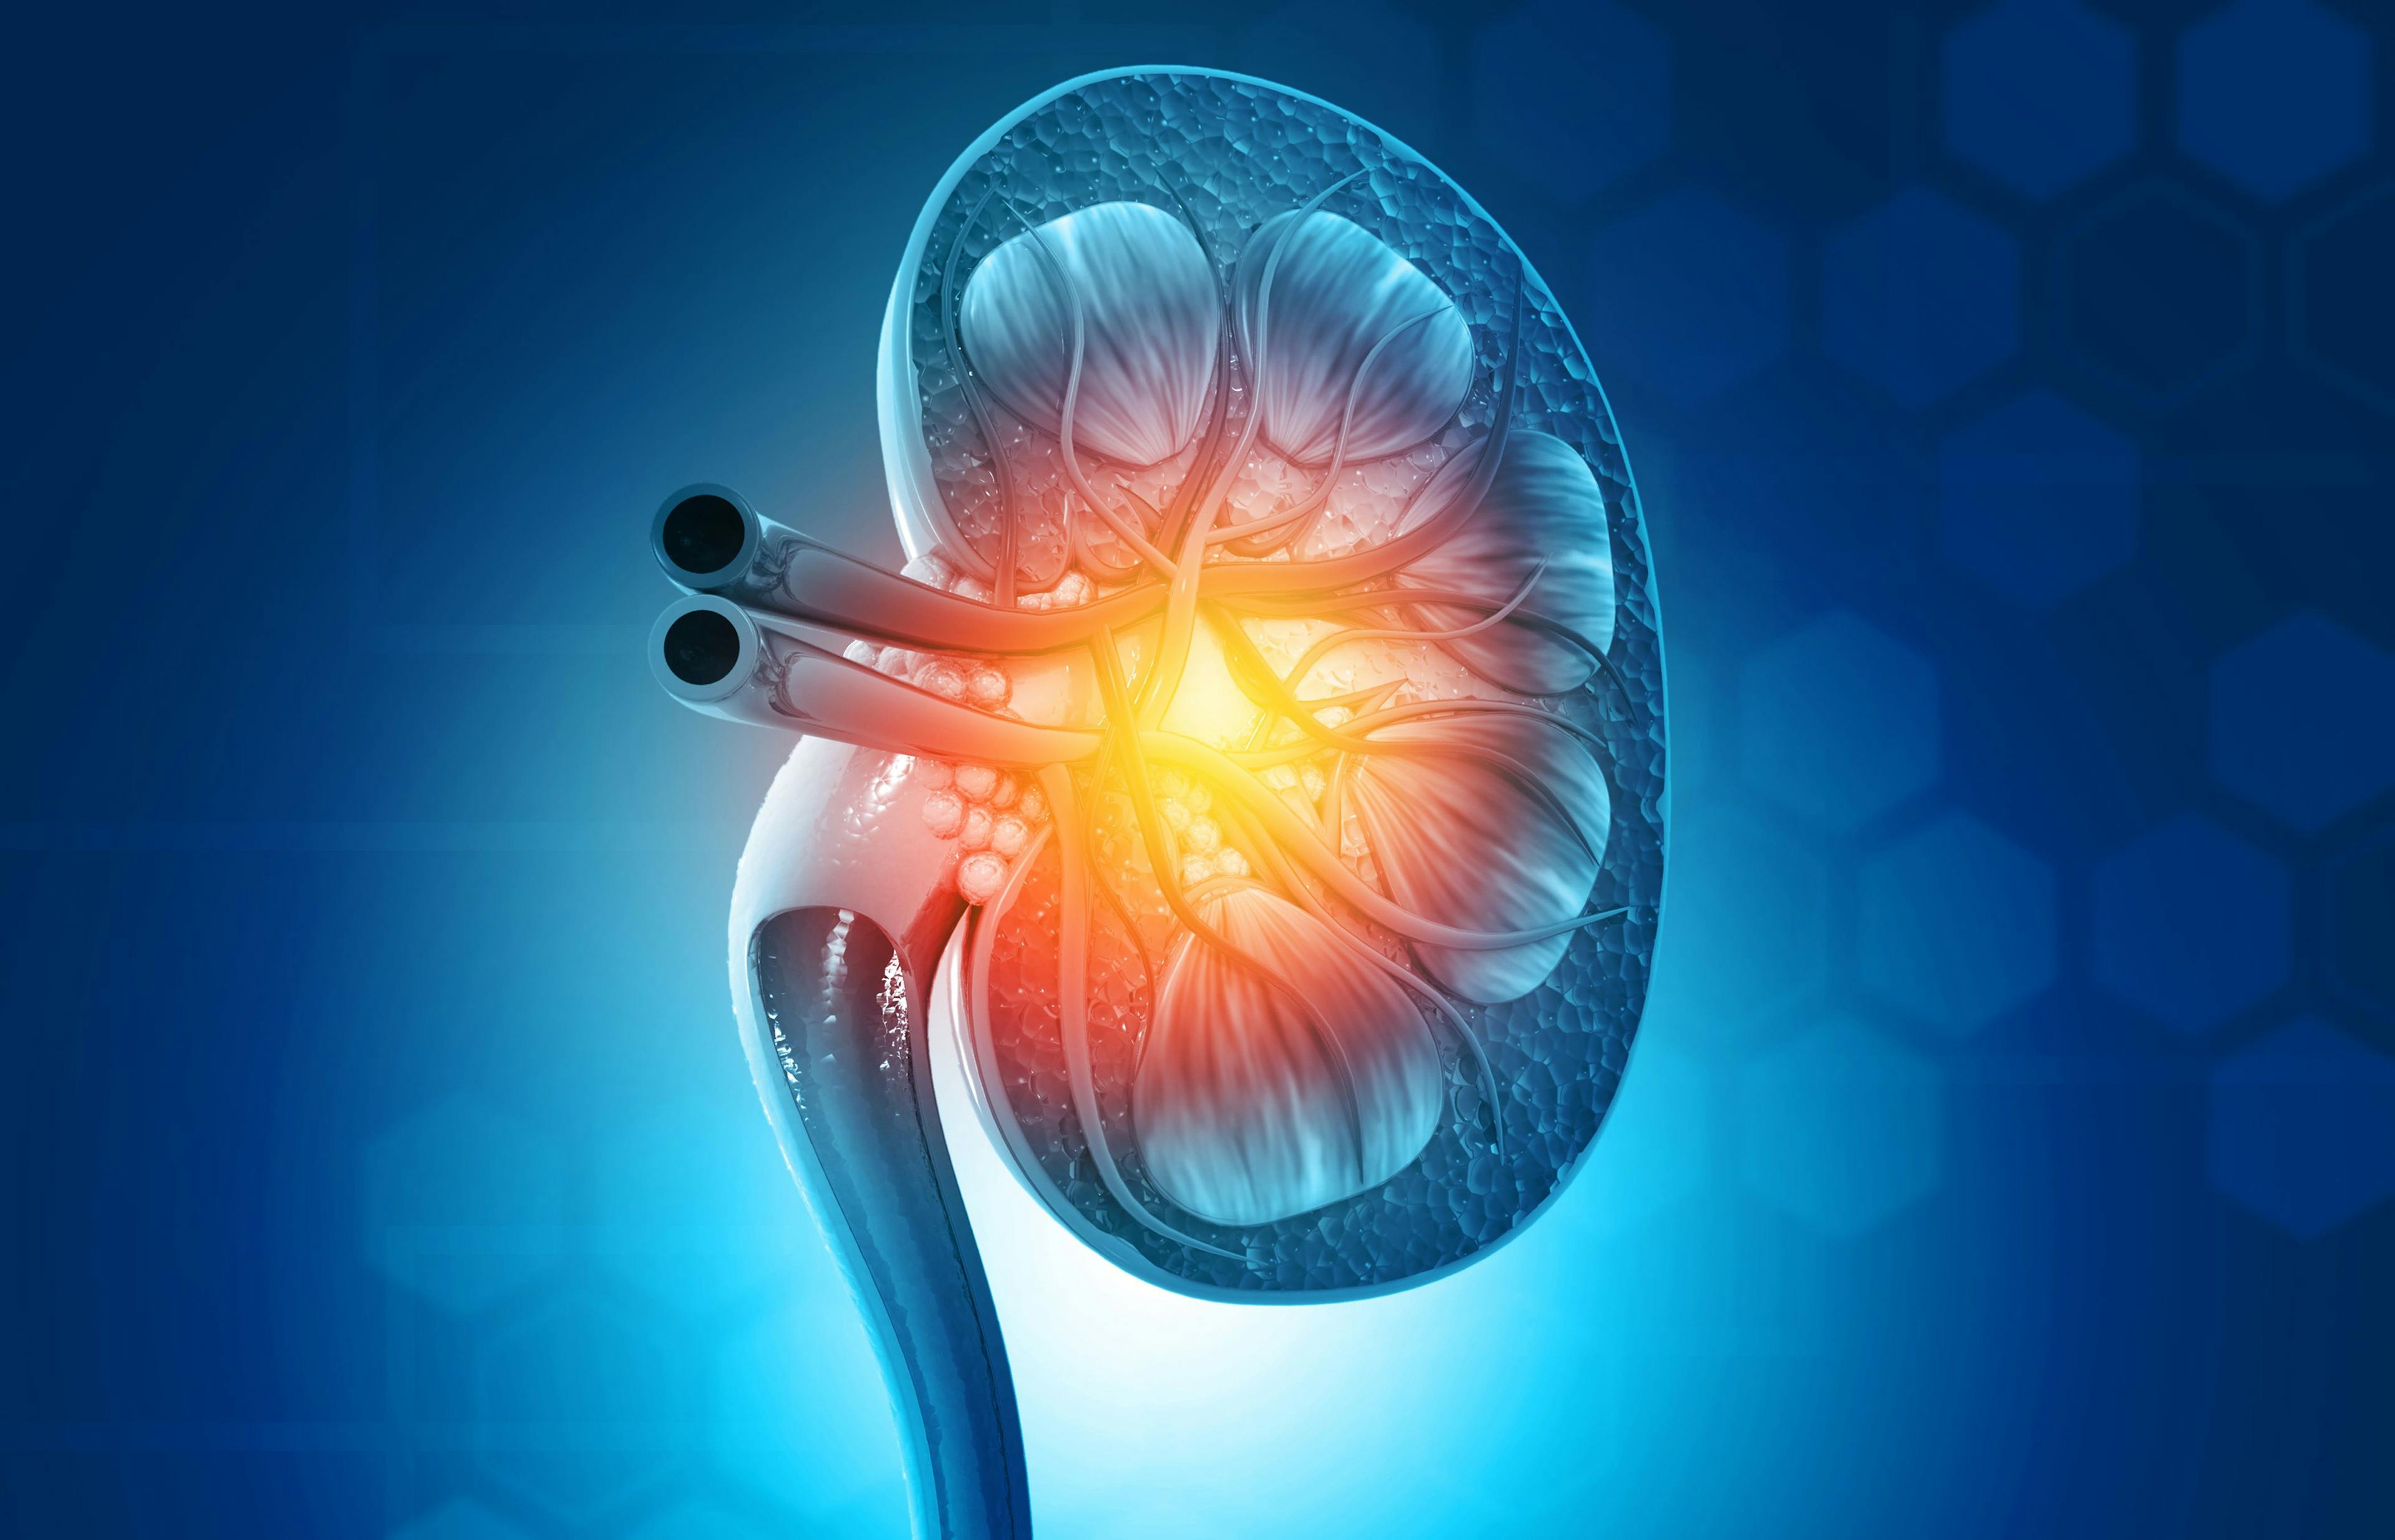 FDA Assigns Review Date for Resubmission of Kidney Disease Treatment